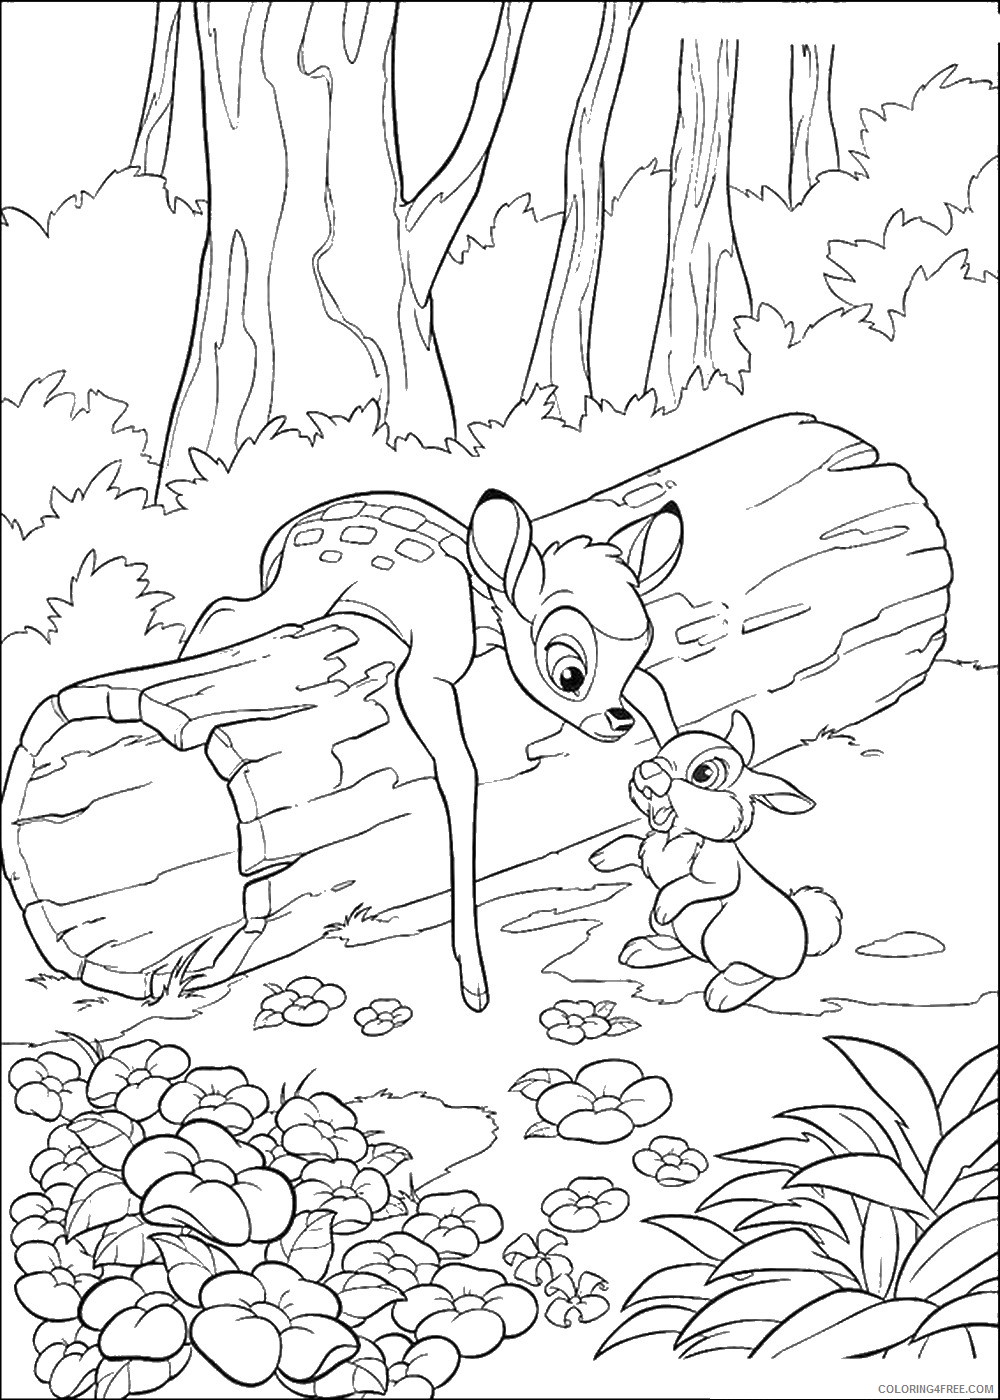 Bambi Coloring Pages Cartoons bambi_cl_14 Printable 2020 0940 Coloring4free